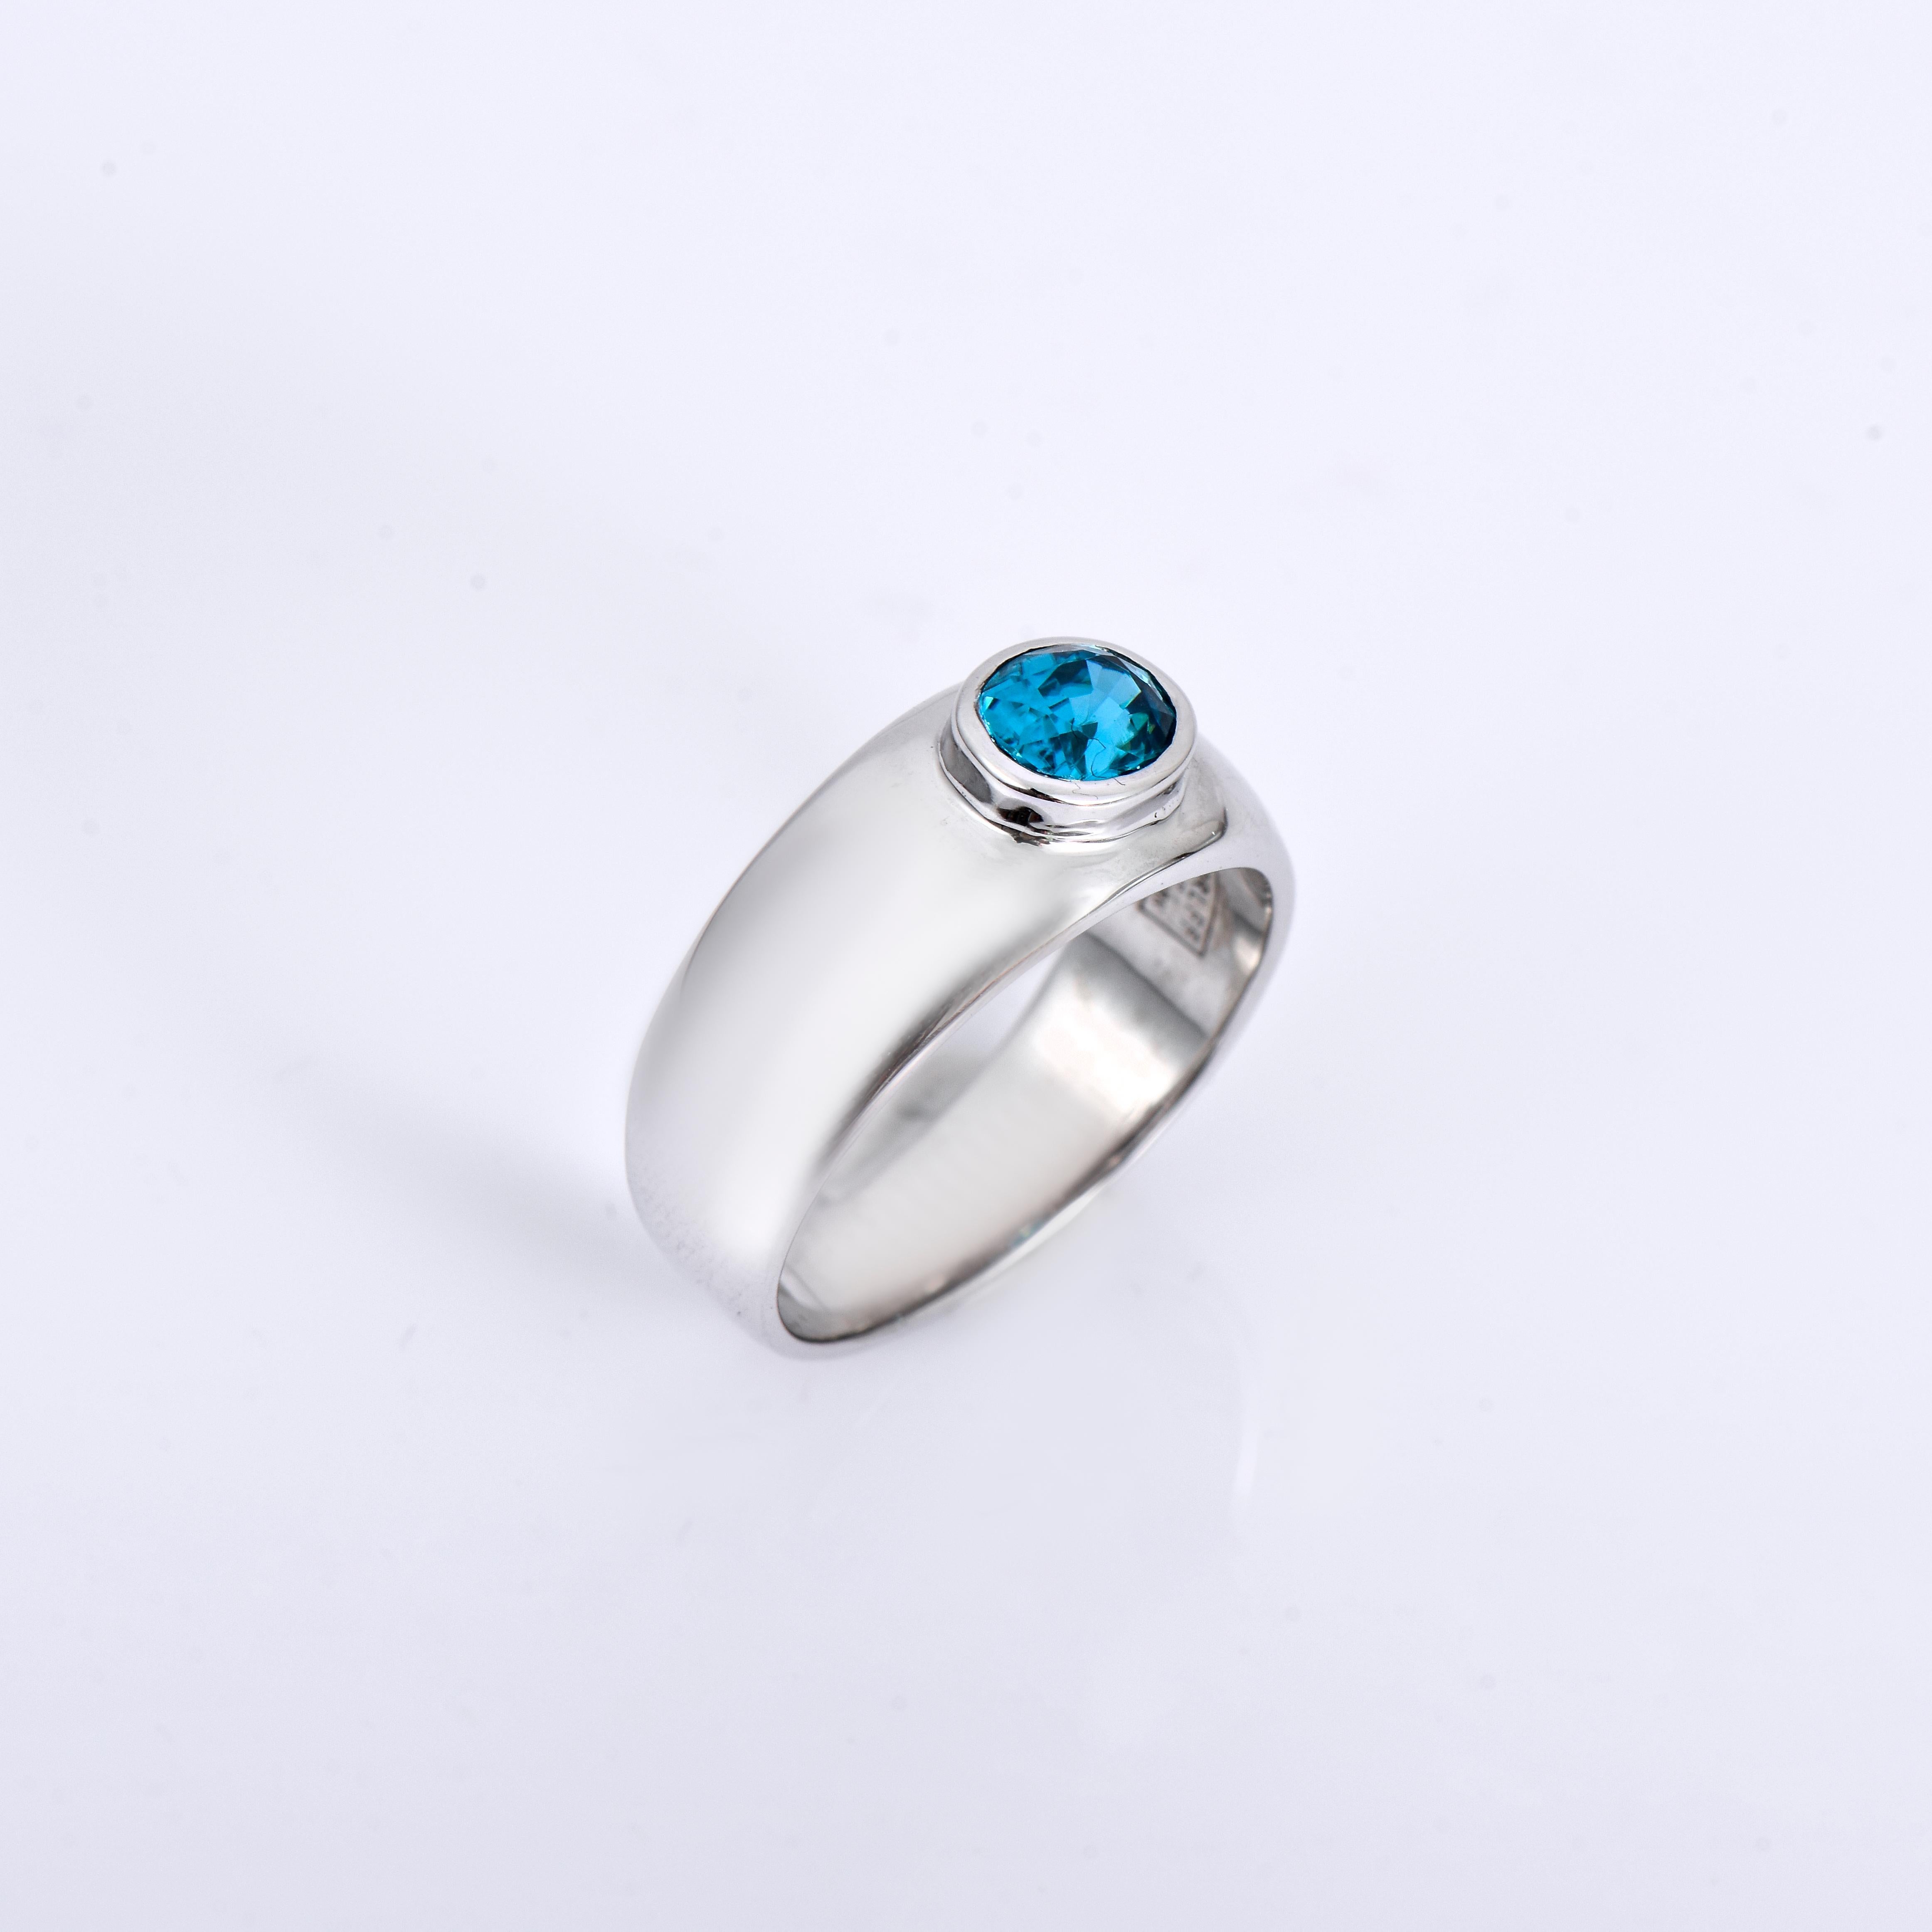 Orloff of Denmark; 925 Sterling Silver Ring set with a 1.3 carat Natural Cambodian Blue Zircon.

This piece has been meticulously hand-crafted out of 925 sterling silver.
It's adorned with a single Cambodian blue zircon. The zircon is oval-cut and